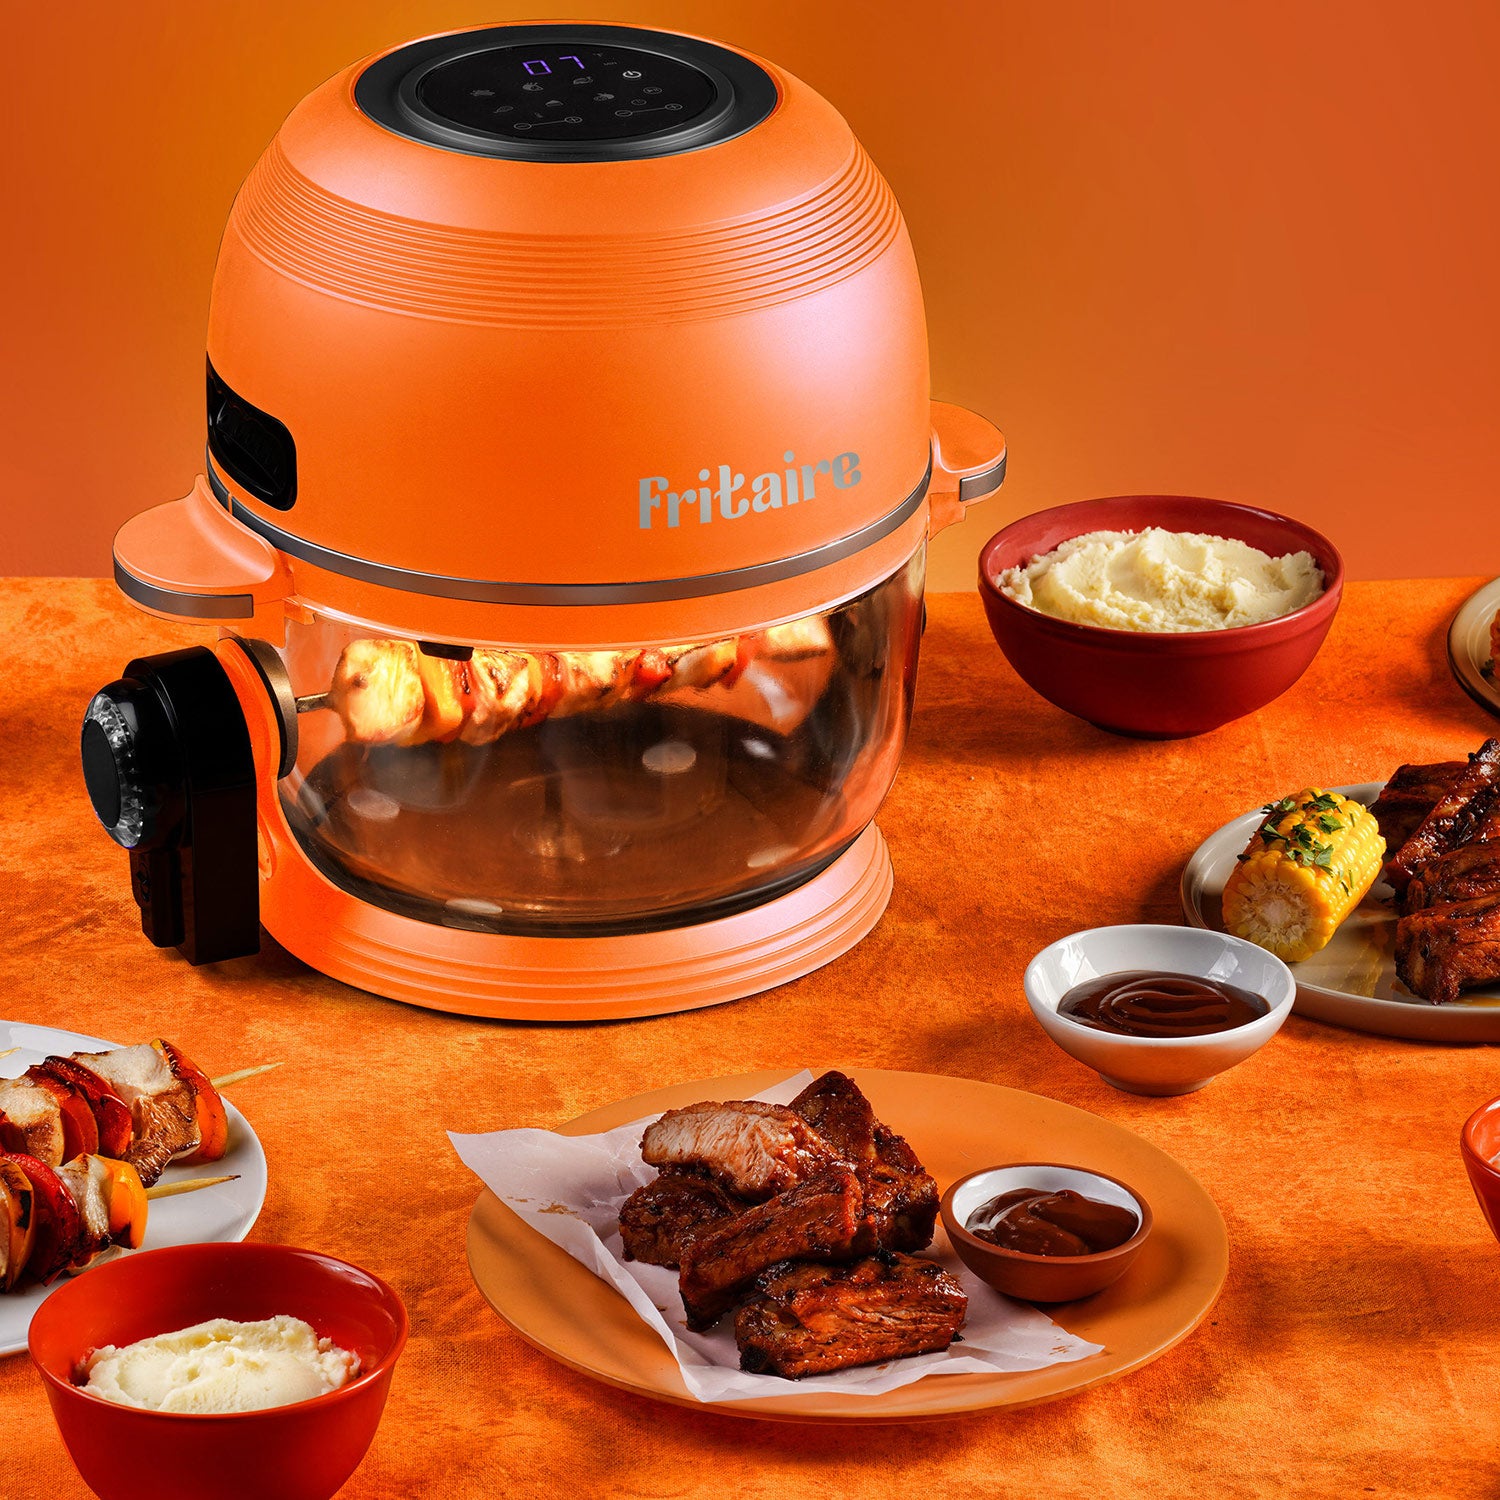 Self Cleaning Air Fryer 🧼 from @fritaire #airfryer #kitchen  #kitchengadgets #food